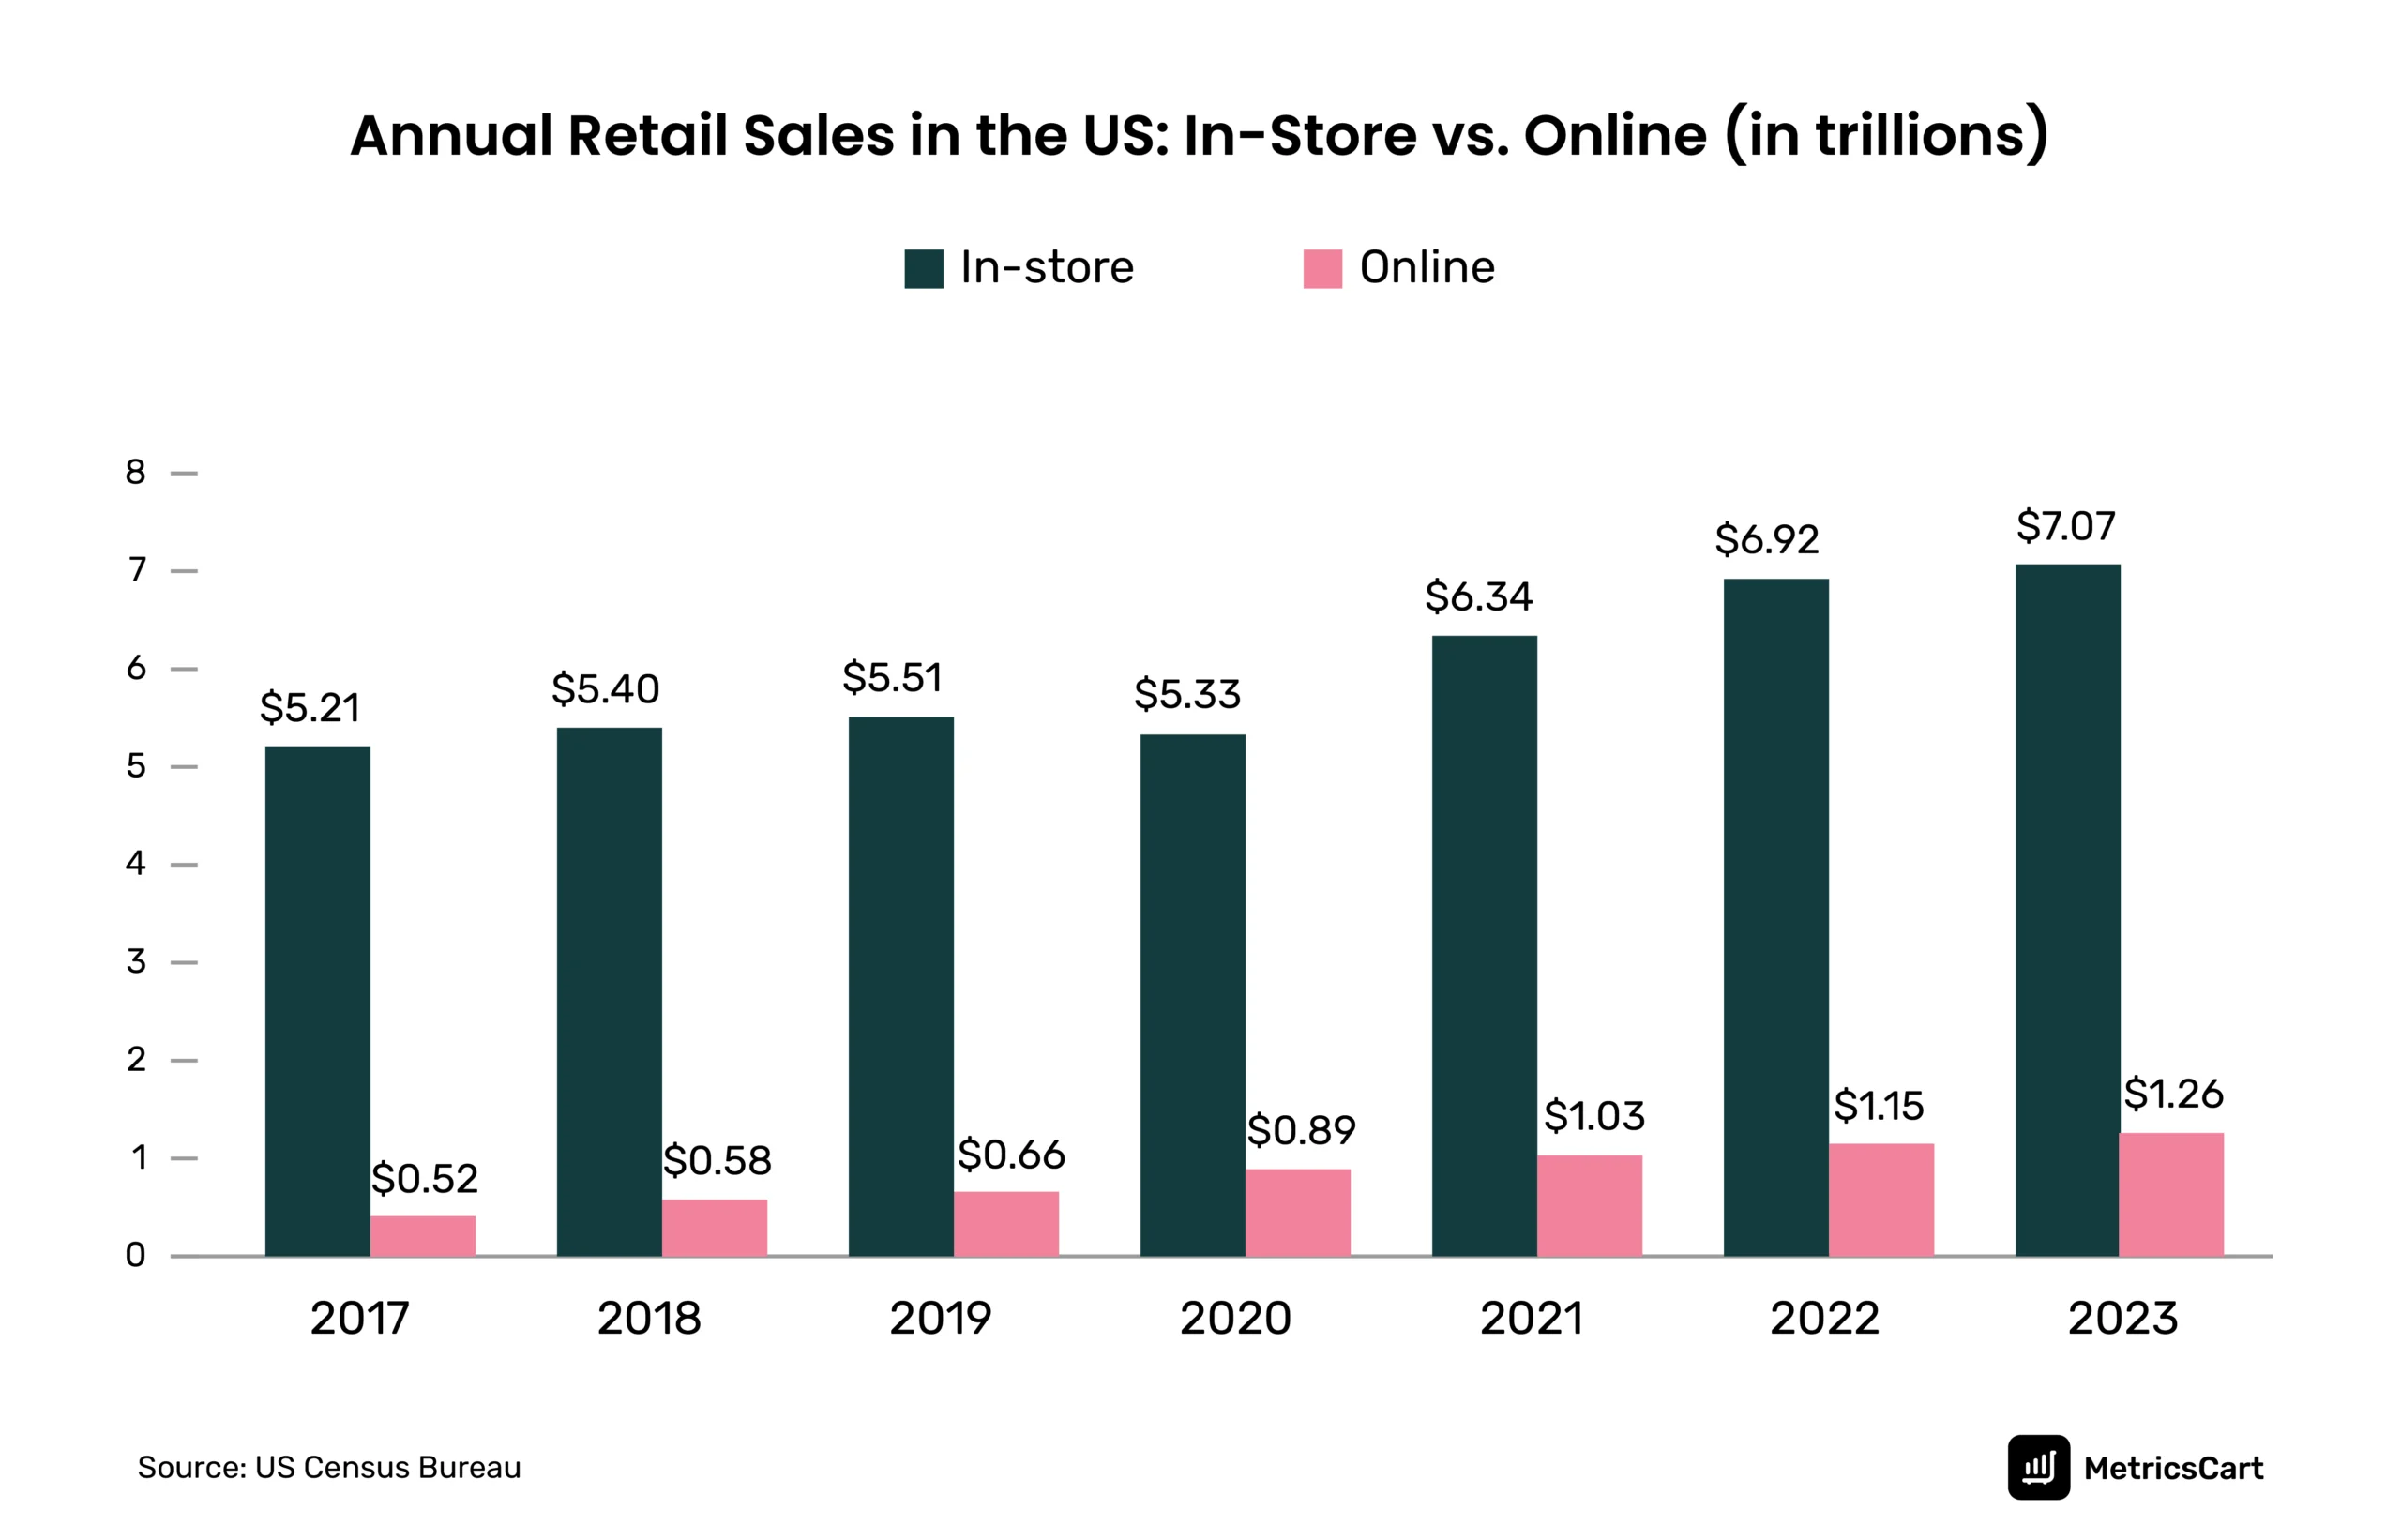 the graph shows in annual retail sales in-store vs. online in the US